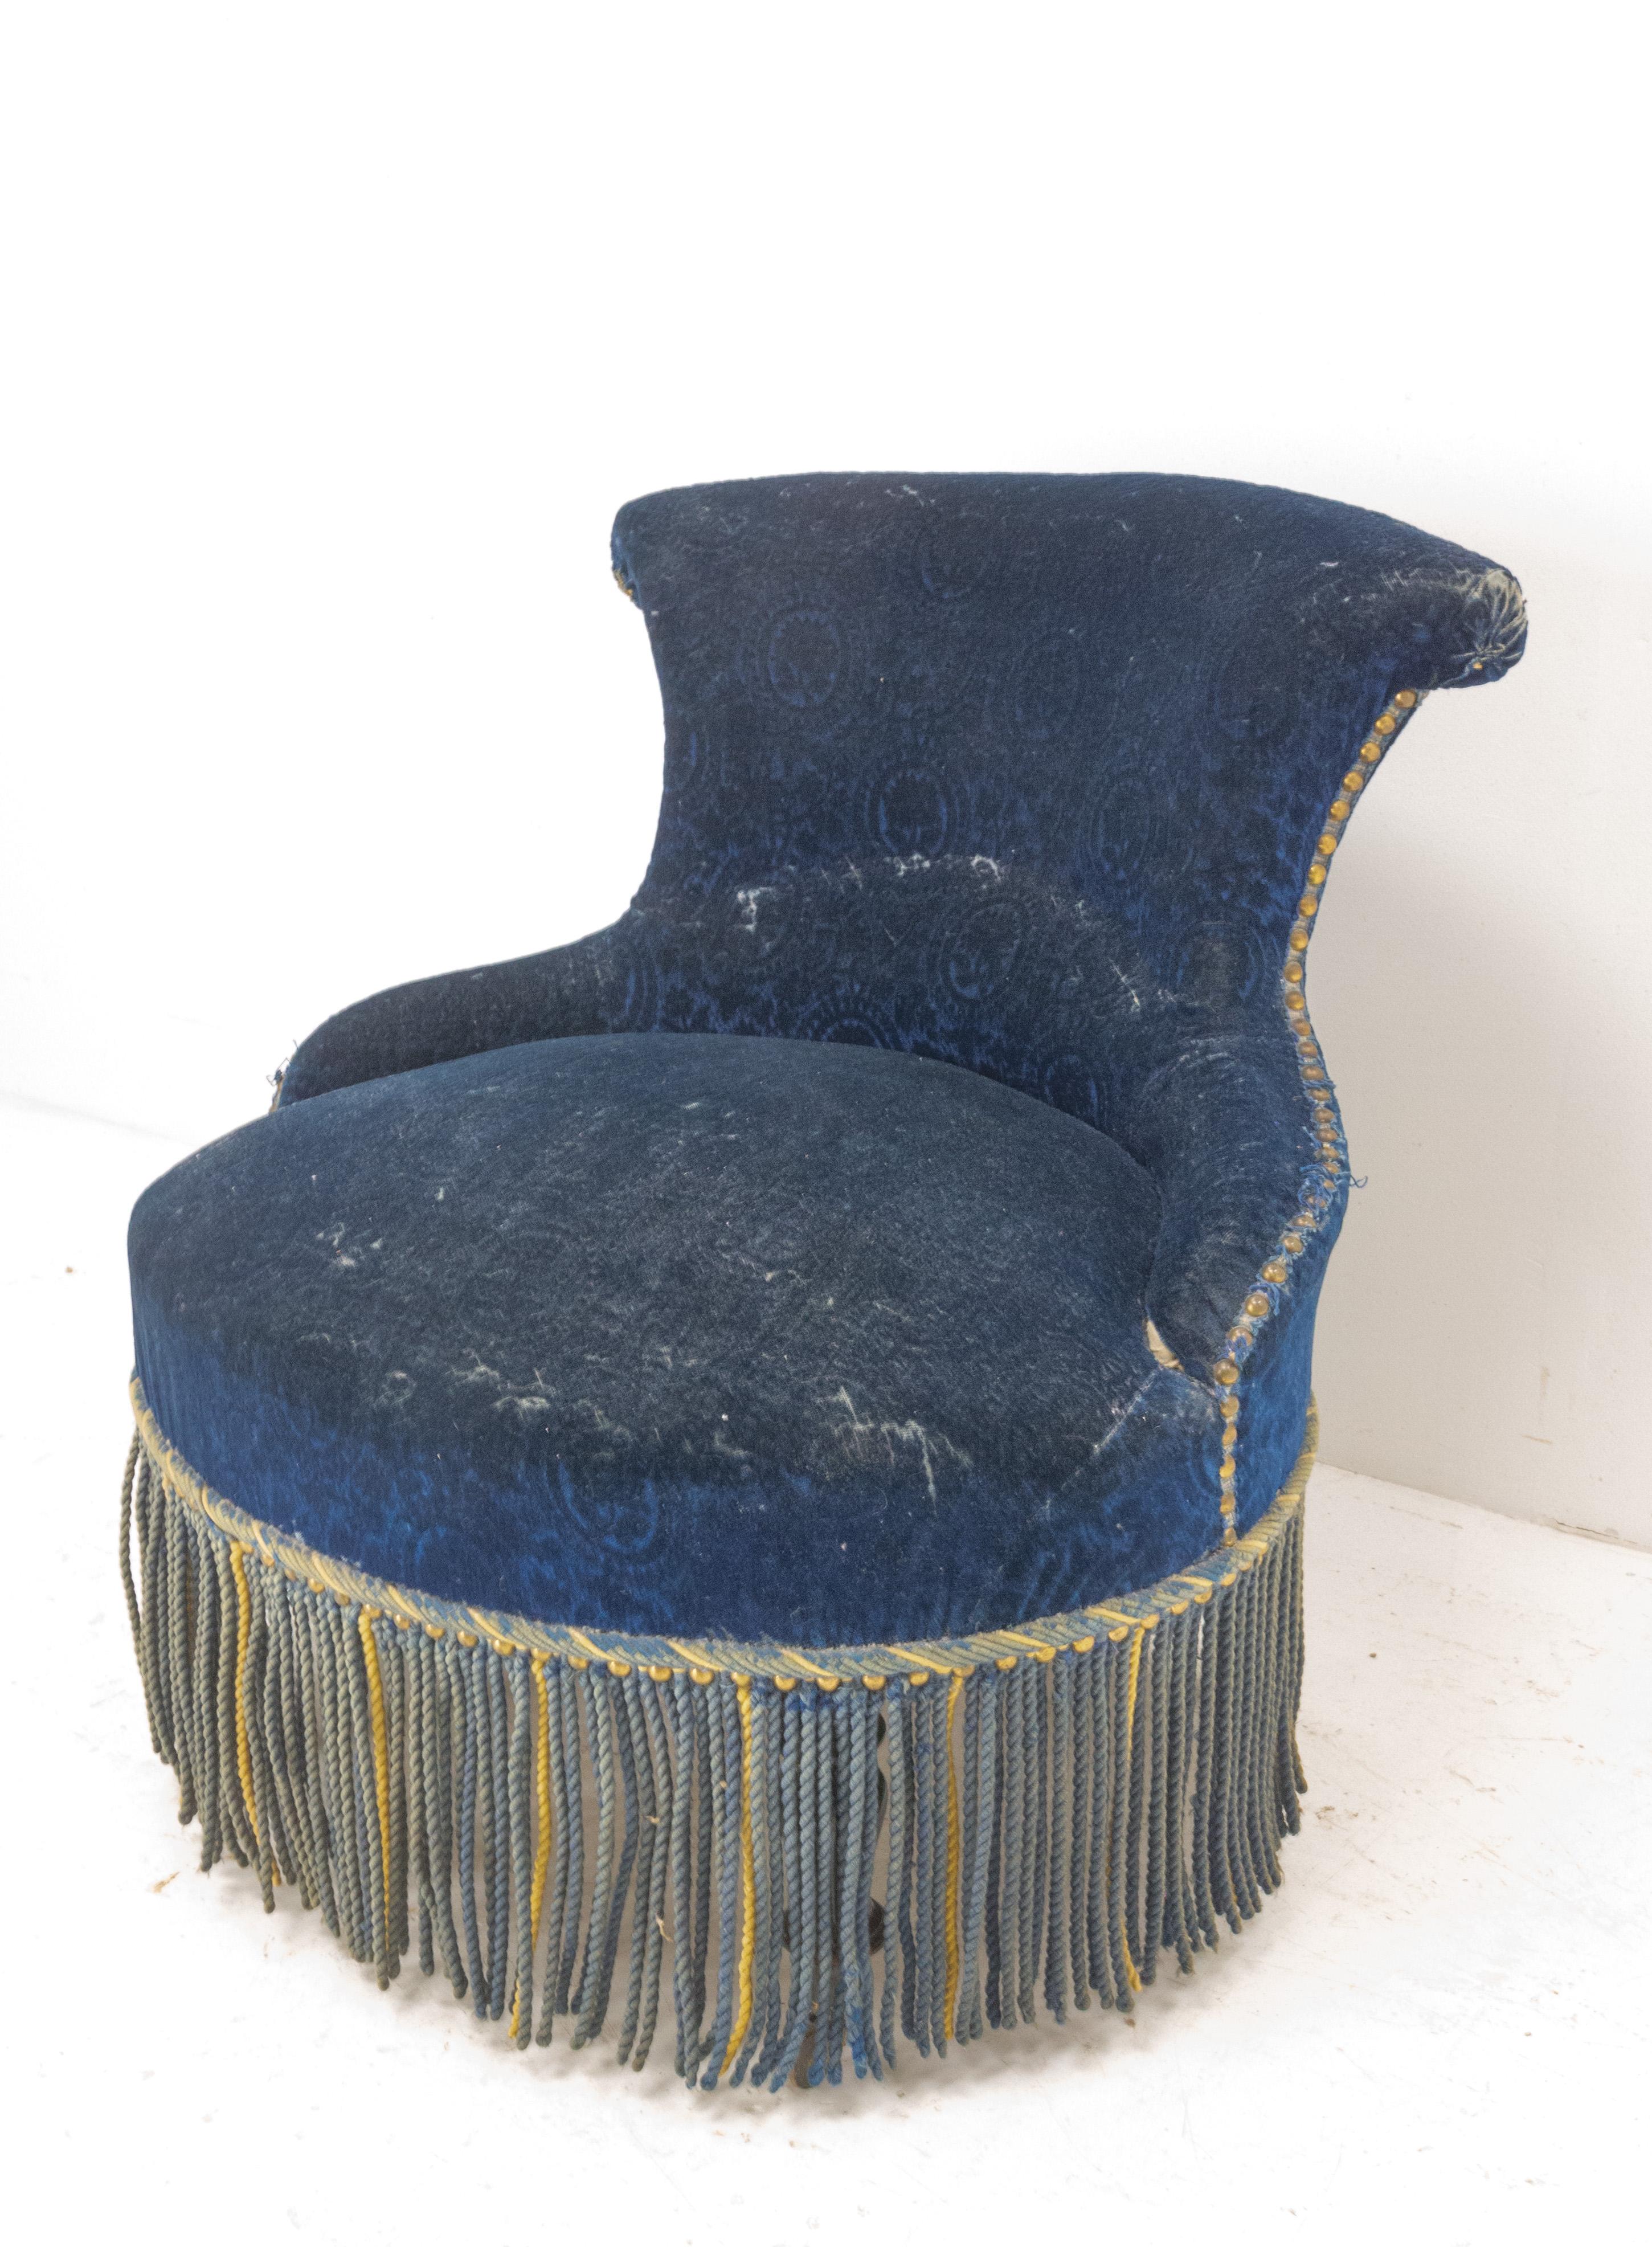 Fauteuil Crapaud French Napoleon III, circa 1890
Antique, 19th century
Atypical form
To recover in fabric of your choice to suit your interior
Sound and solid, the upholstery has springs.
Very comfortable.

Shipping:
L65 P67 H67 13 kg.
 